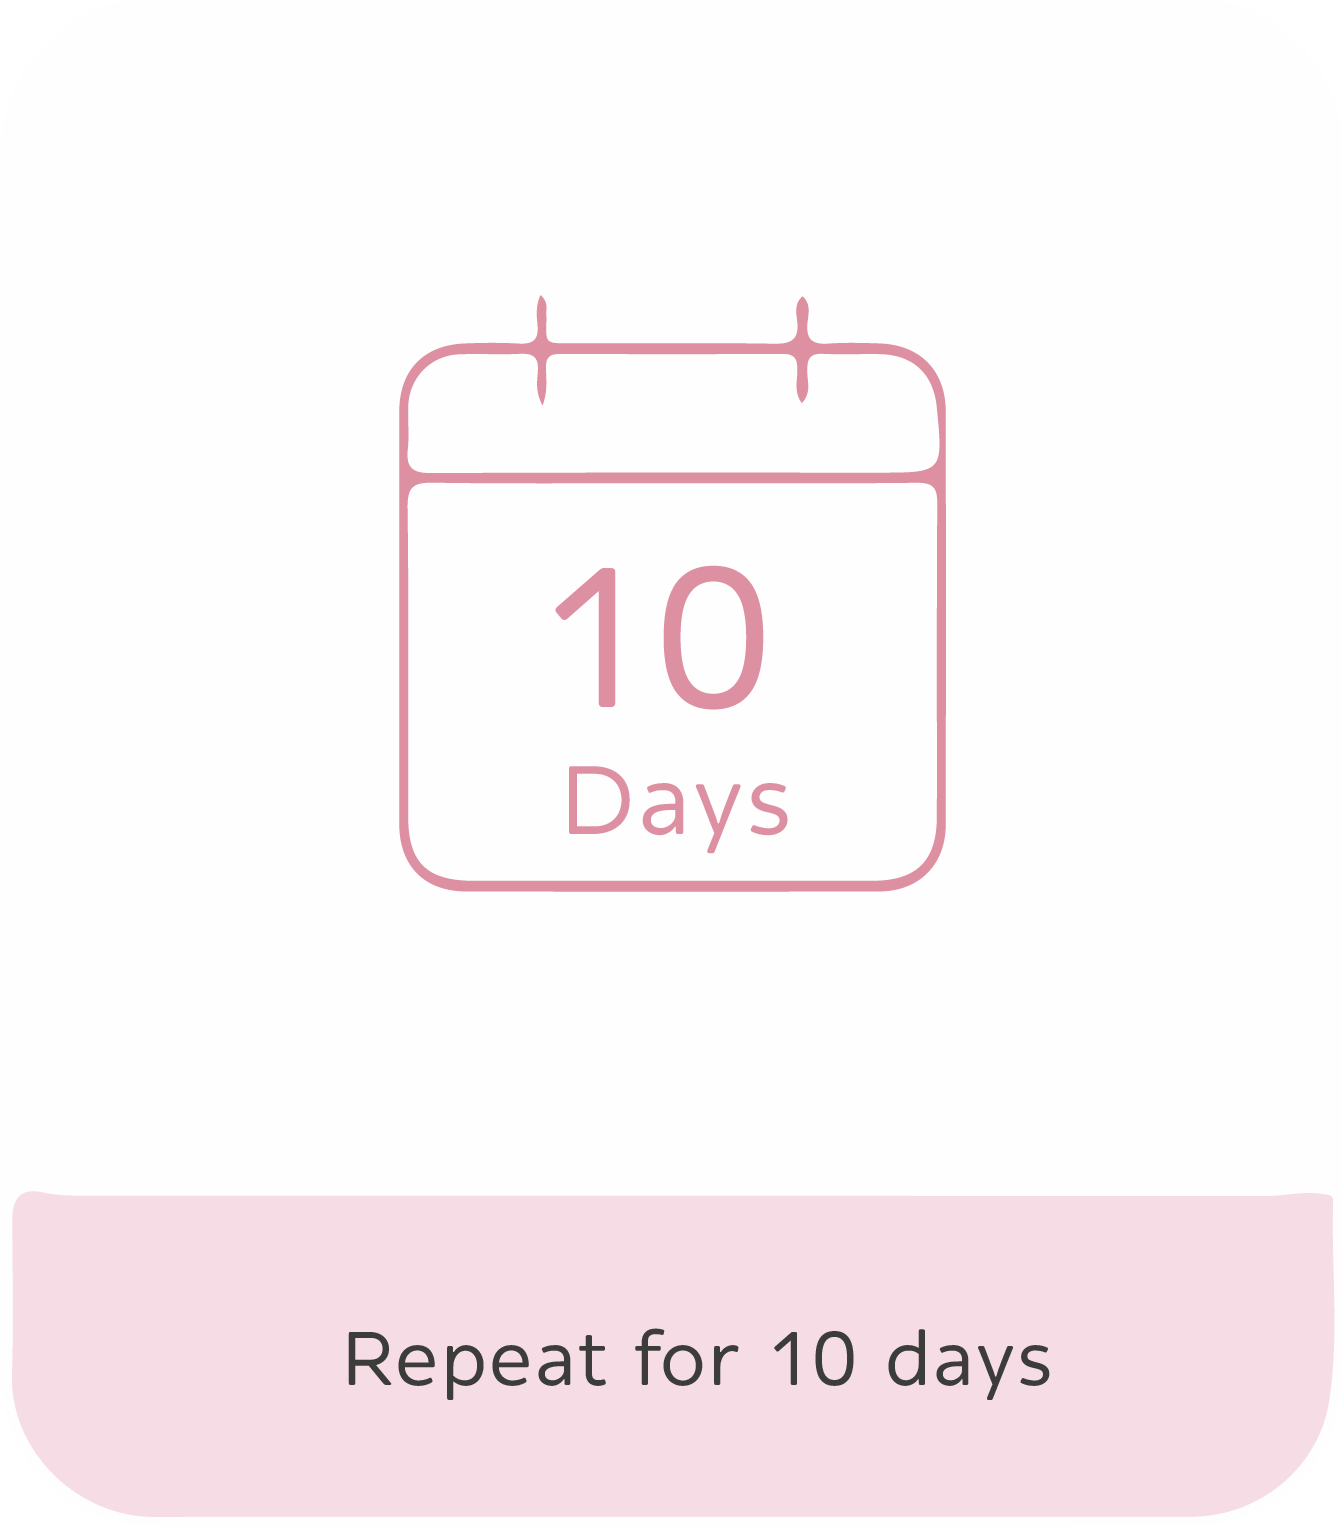 How to use product - Fourth step: Repeat for 10 days